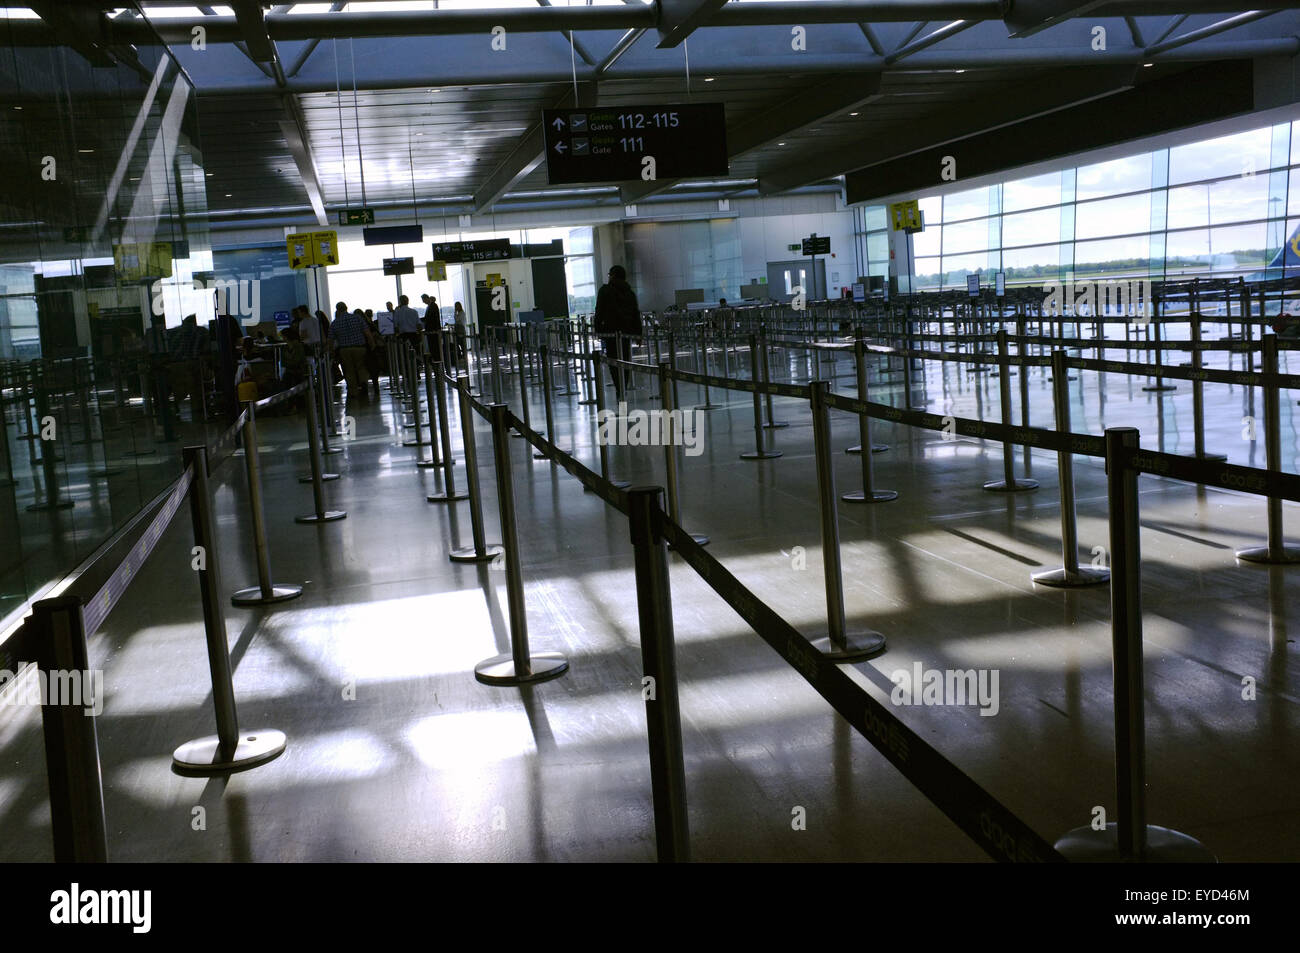 Temporary rope lanes created by stanchions in Dublin Airport directing departing passengers to different boarding gates. Stock Photo